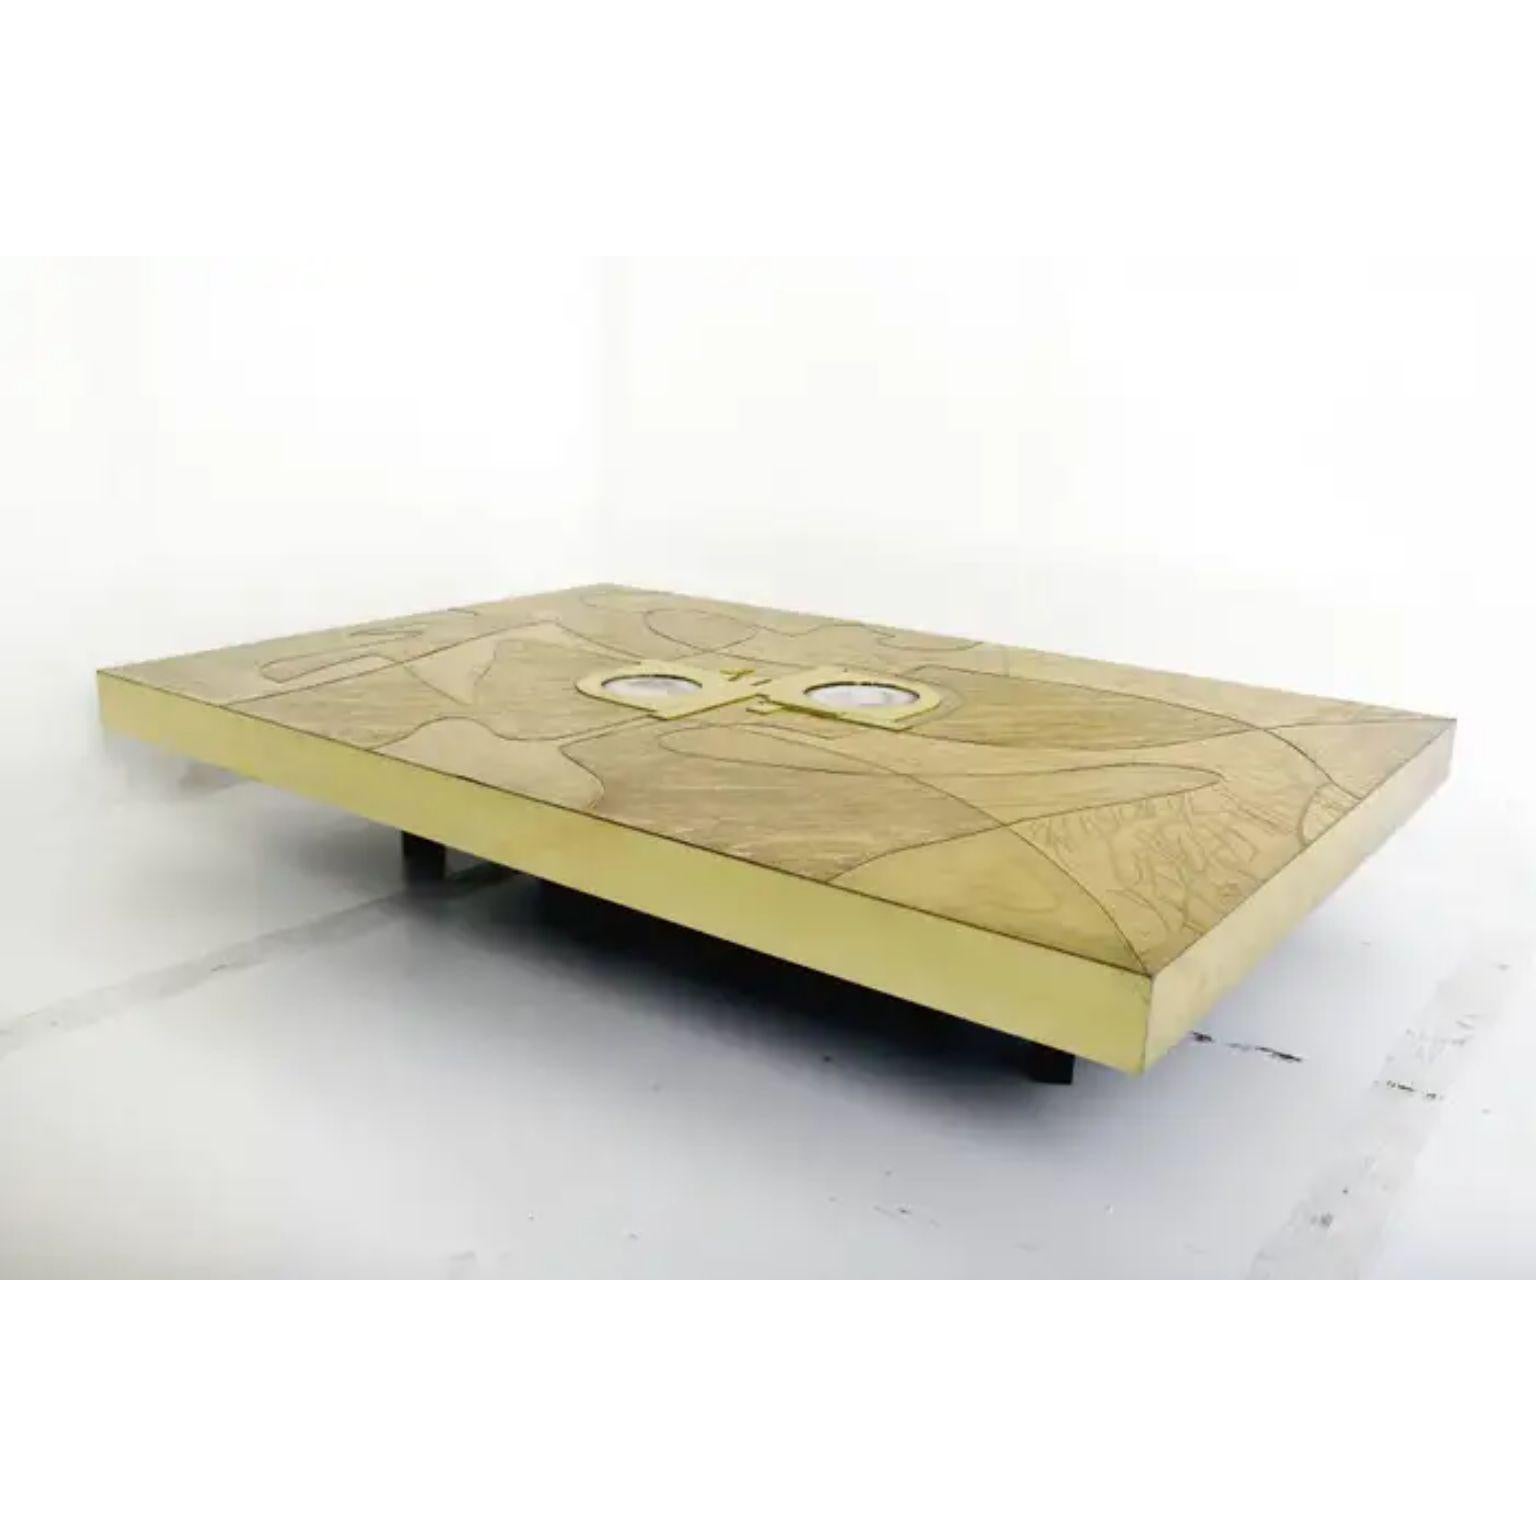 Mosaic 2 Stone And Brass Coffee Table by Brutalist Be
One Of A Kind
Dimensions: D 100 x W 140 x H 35 cm.
Materials: Brass and agate stone.

Also available in copper and in matte, glossy or black-patinated finishes. Please contact us. 

Abstract hand